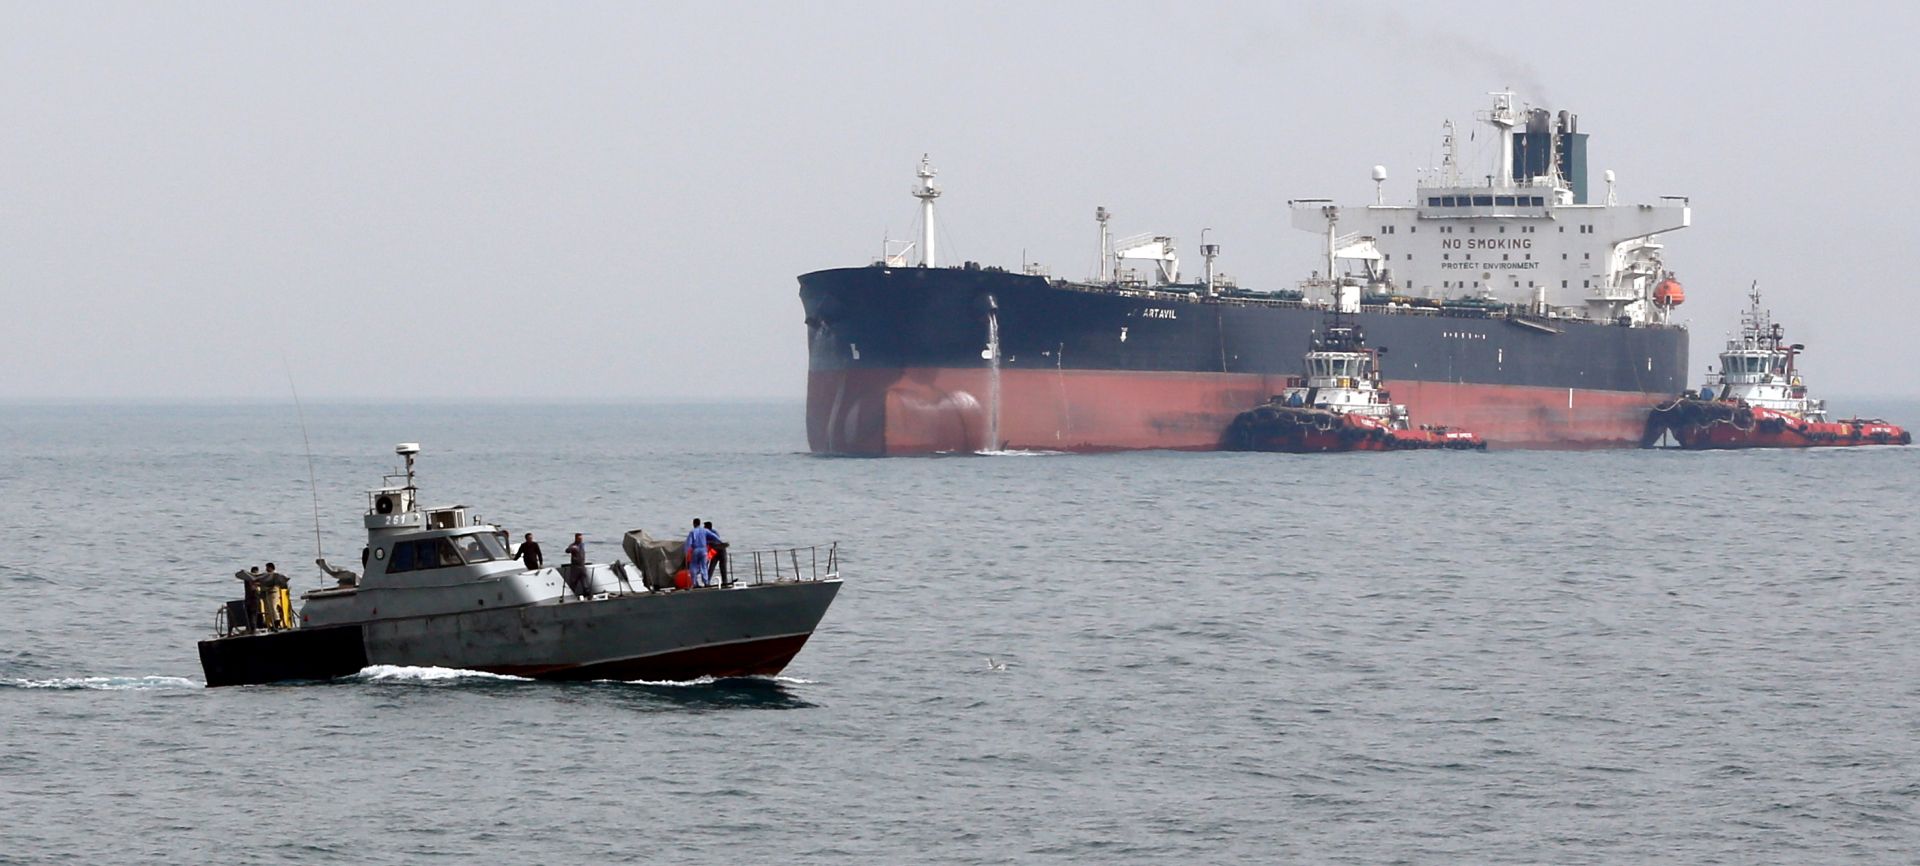 epa07709521 (FILE) - An Iranian military boat patrols next to the Artavil oil tanker, at the Kharg Island, in Persian Gulf, southern Iran, 12 March 2017 (reissued 11 July 2019). Reports on 11 July 2019 state British frigate HMS Montrose warned Iranian boats believed to belong to  Islamic Revolution Guard Corps (IRGC) of Iran that allegedly tried to impede the British Heritage tanker near the Gulf. HMS Montrose took position between the boats and the tanker while training its guns on the boats  reports state. The vessels then left the scene with no shots being fired on either side. Islamic Revolution Guard Corps (IRGC) has denied any involvement.  EPA/ABEDIN TAHERKENAREH